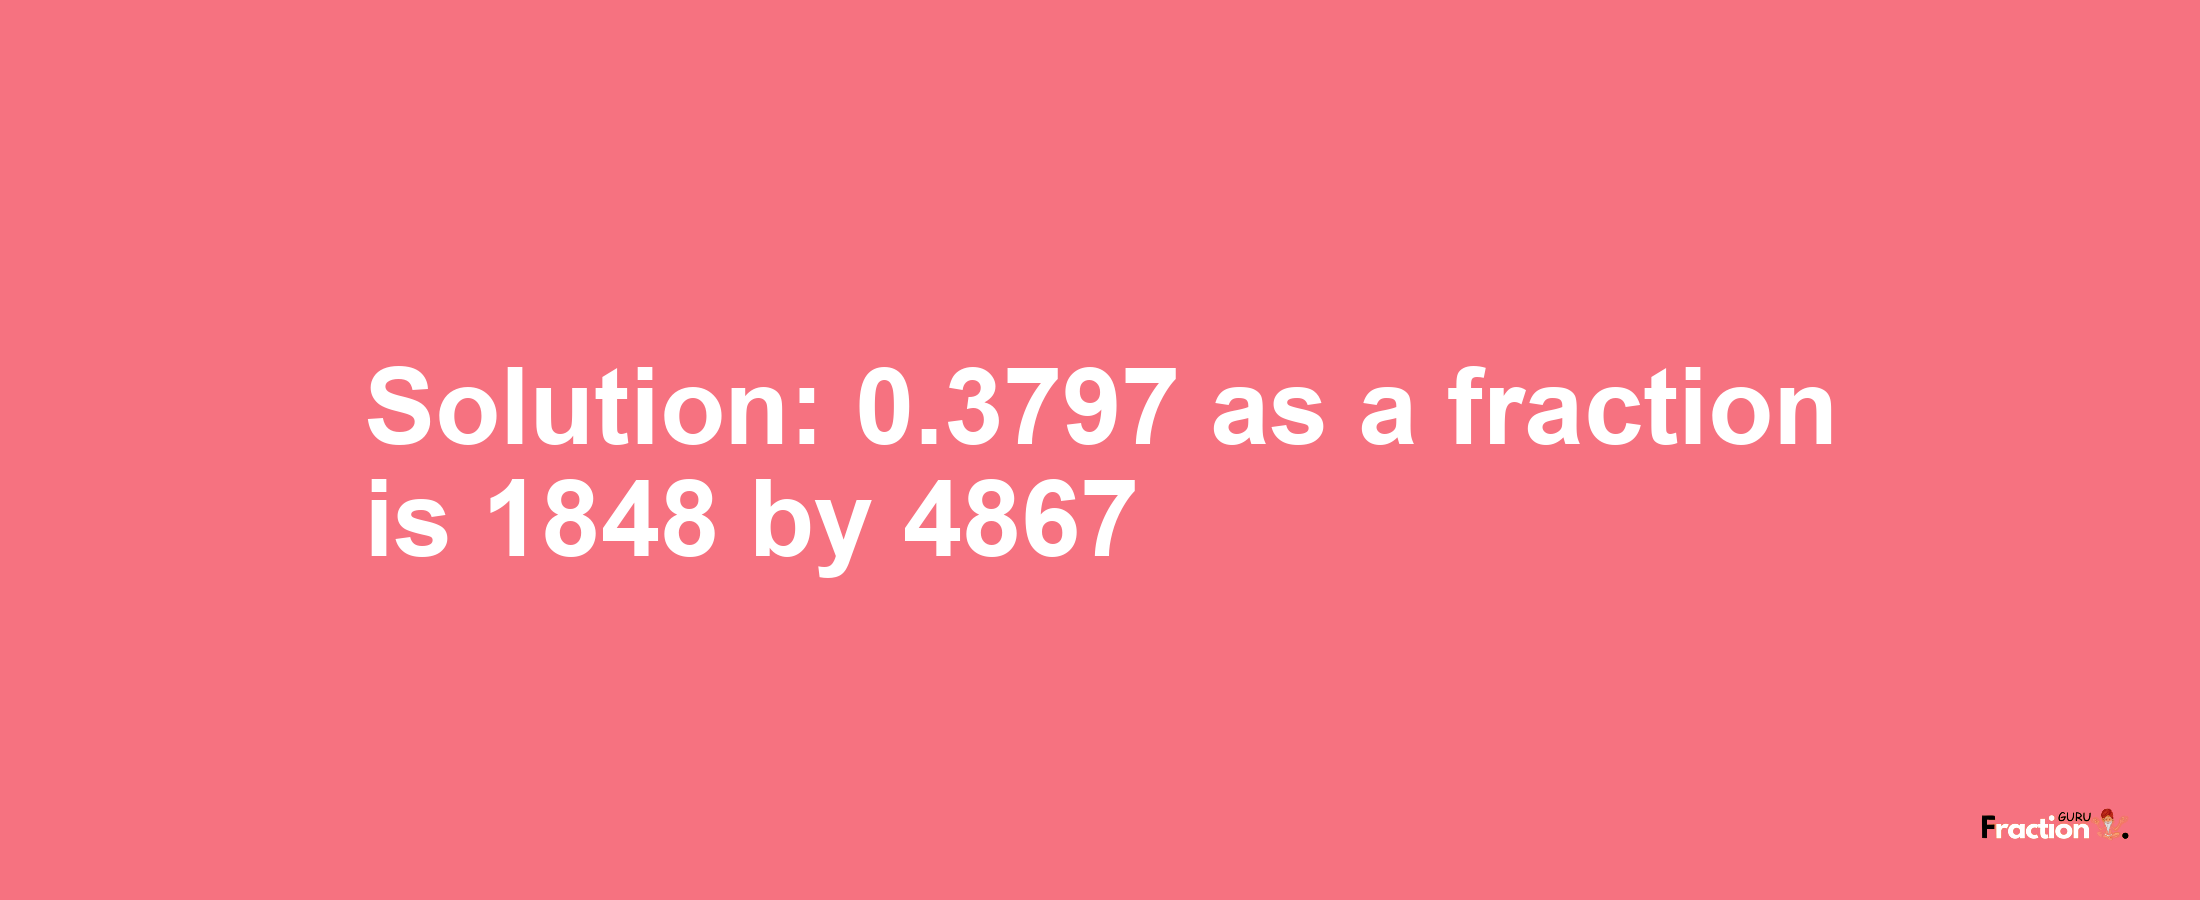 Solution:0.3797 as a fraction is 1848/4867